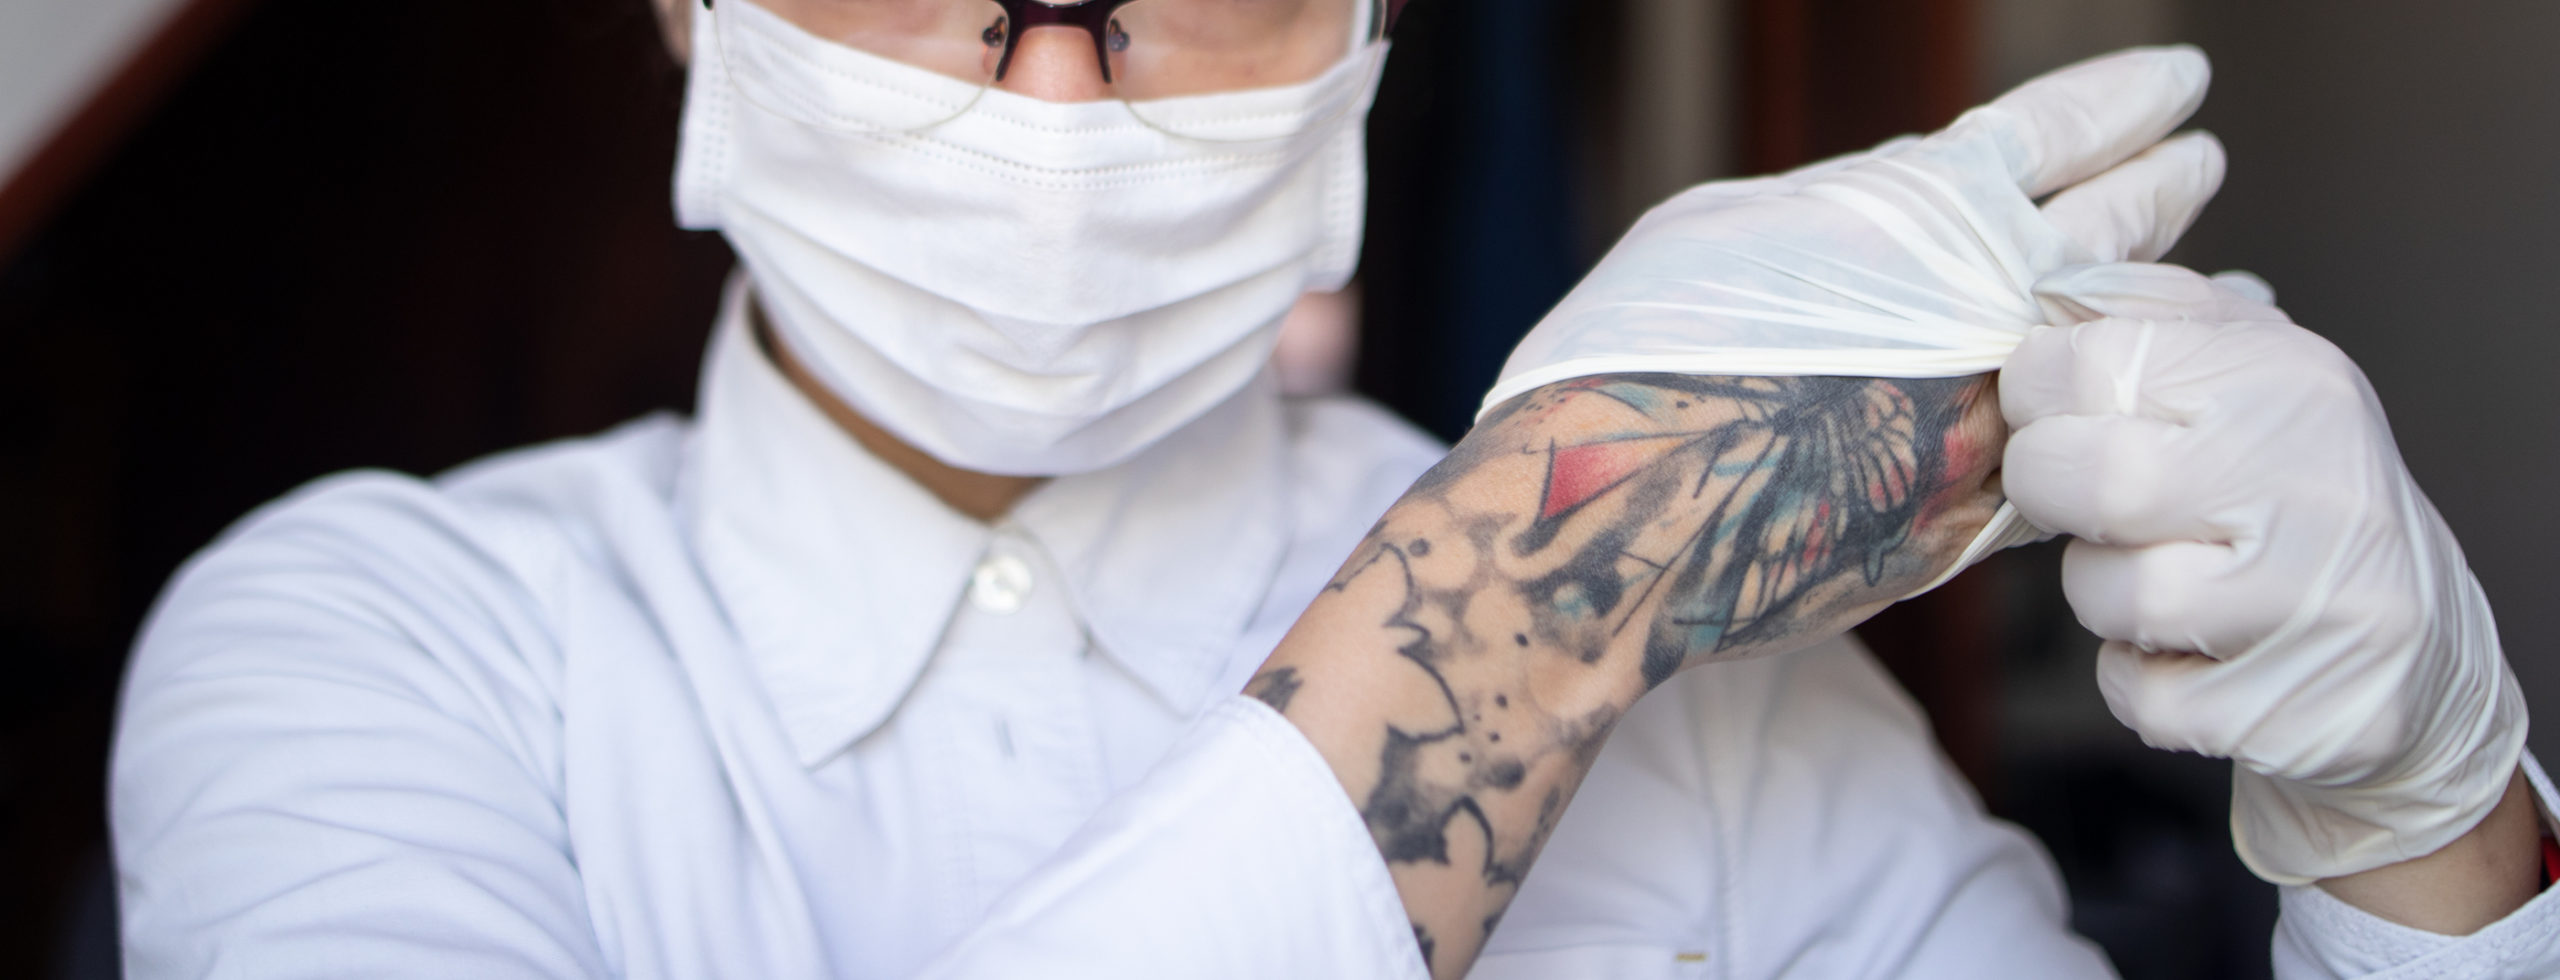 Can Nurses Have Tattoos Hospital Policy and Exceptions